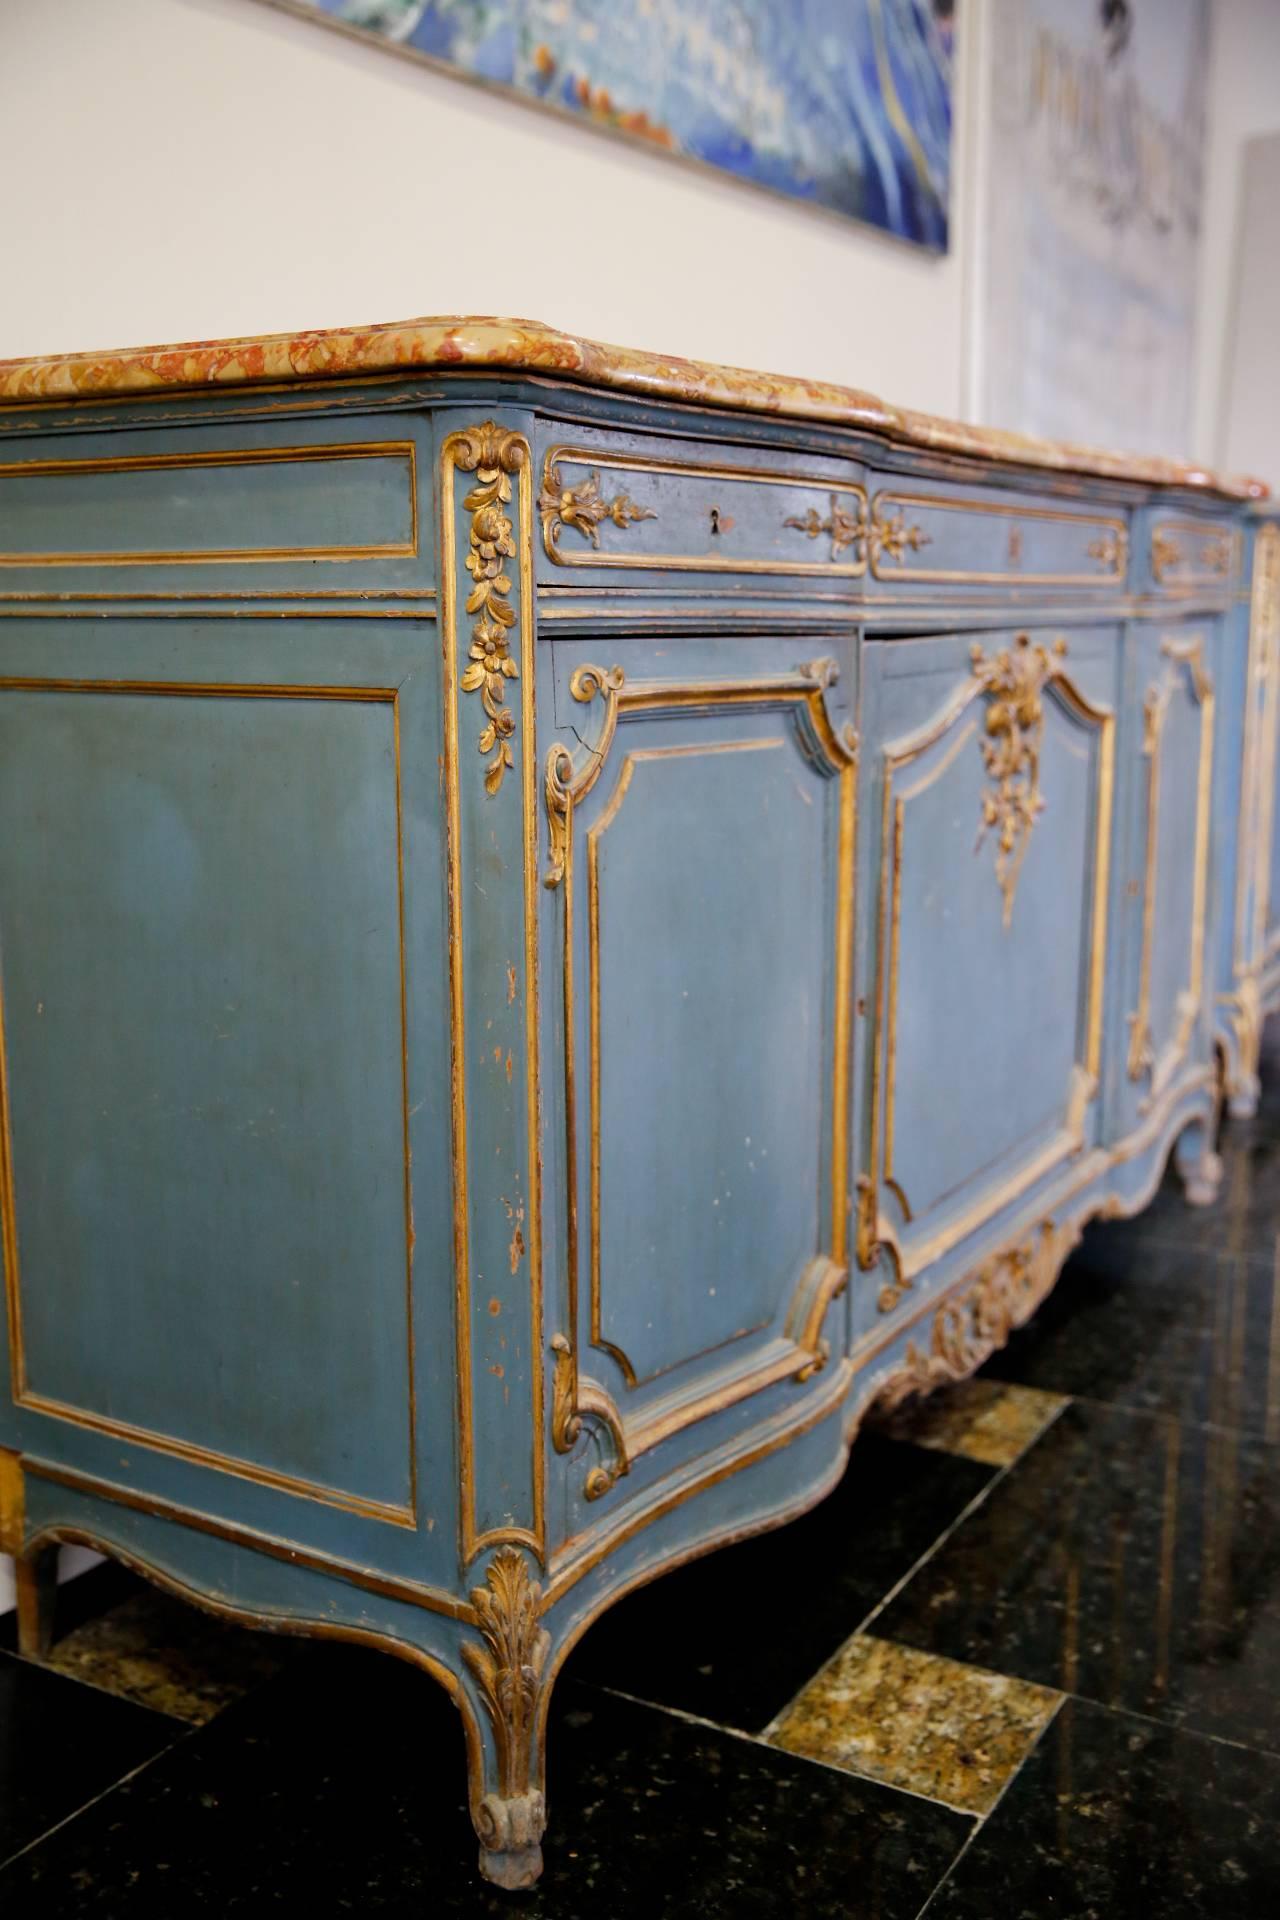 A very charming later 19th century, French Provençal enfilade buffet. It is done in painted wood in gold and light blue with a beautifully shaped marble top in terracotta and yellow. Three molded door panels and three drawers, all with wonderful